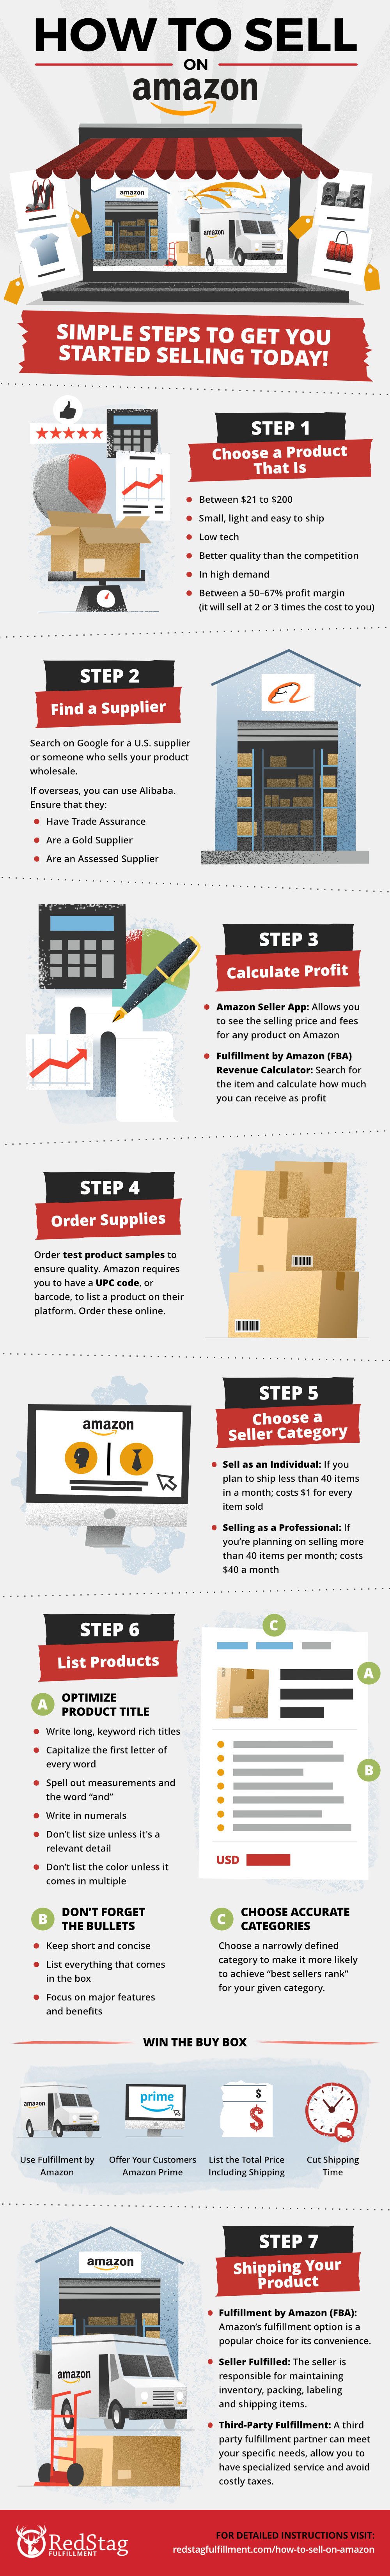 How to sell on Amazon infographic